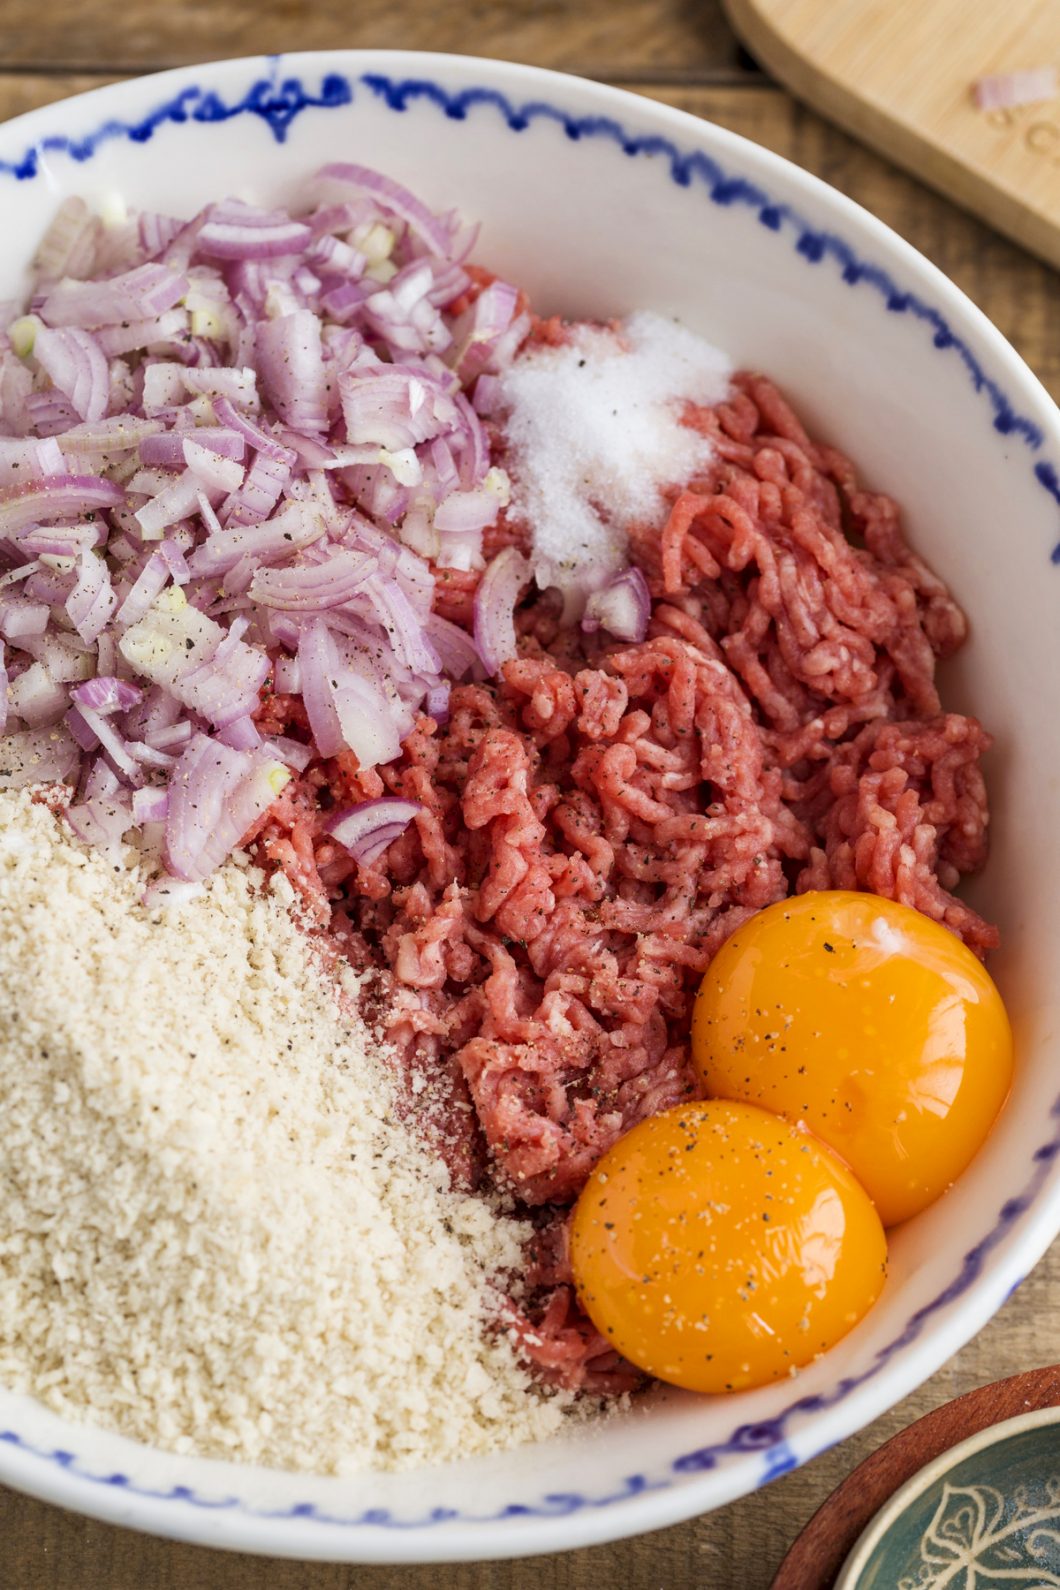 One bowl with ground meat, egg yolks, breadcrumbs, minced onion, salt and pepper.